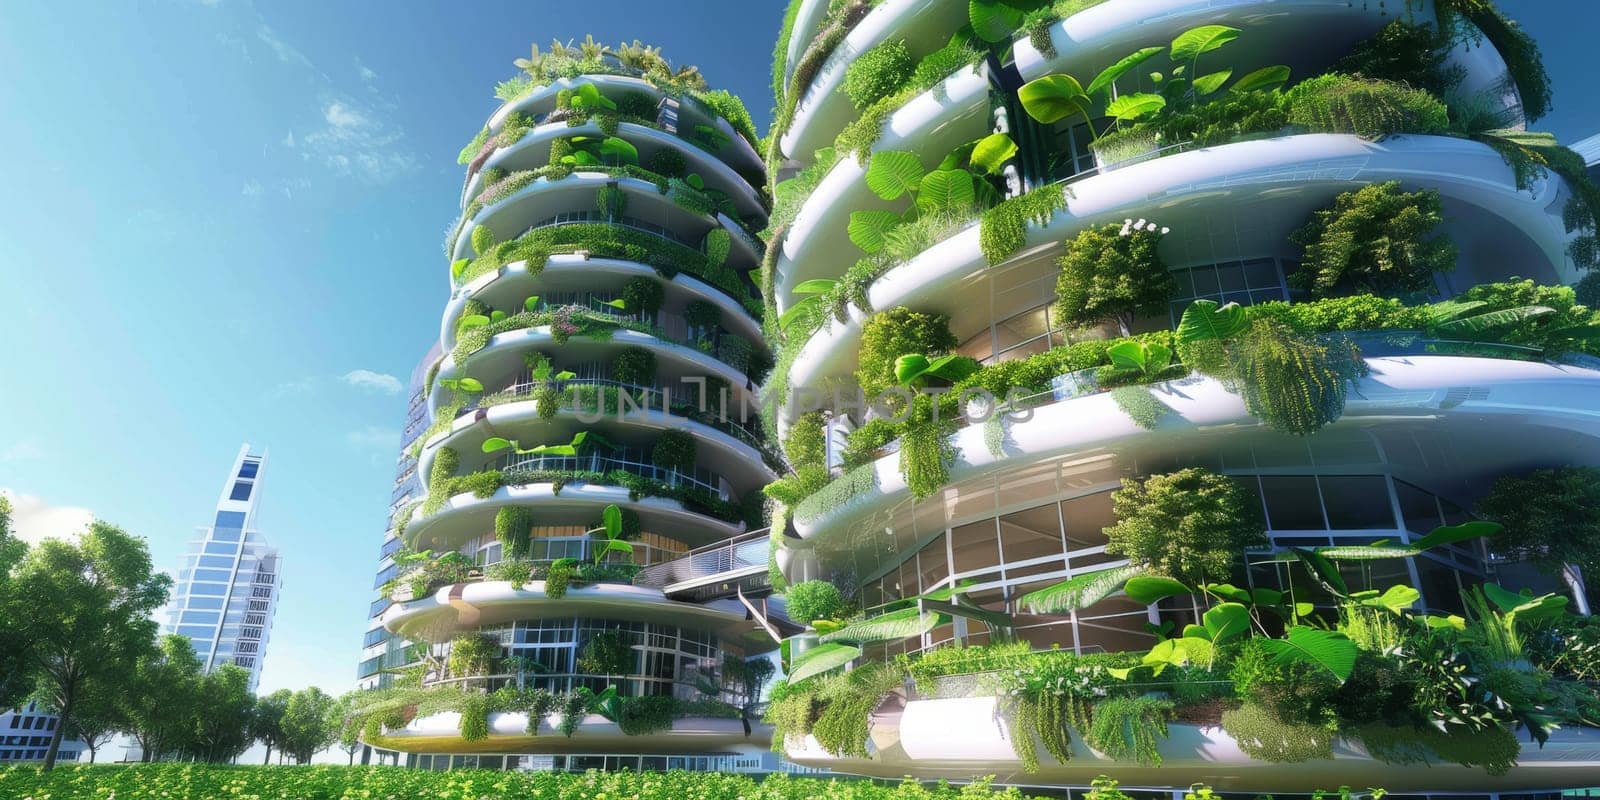 Urban agriculture systems, hydroponic gardens, or a green walls inside buildings, showcasing innovative solutions